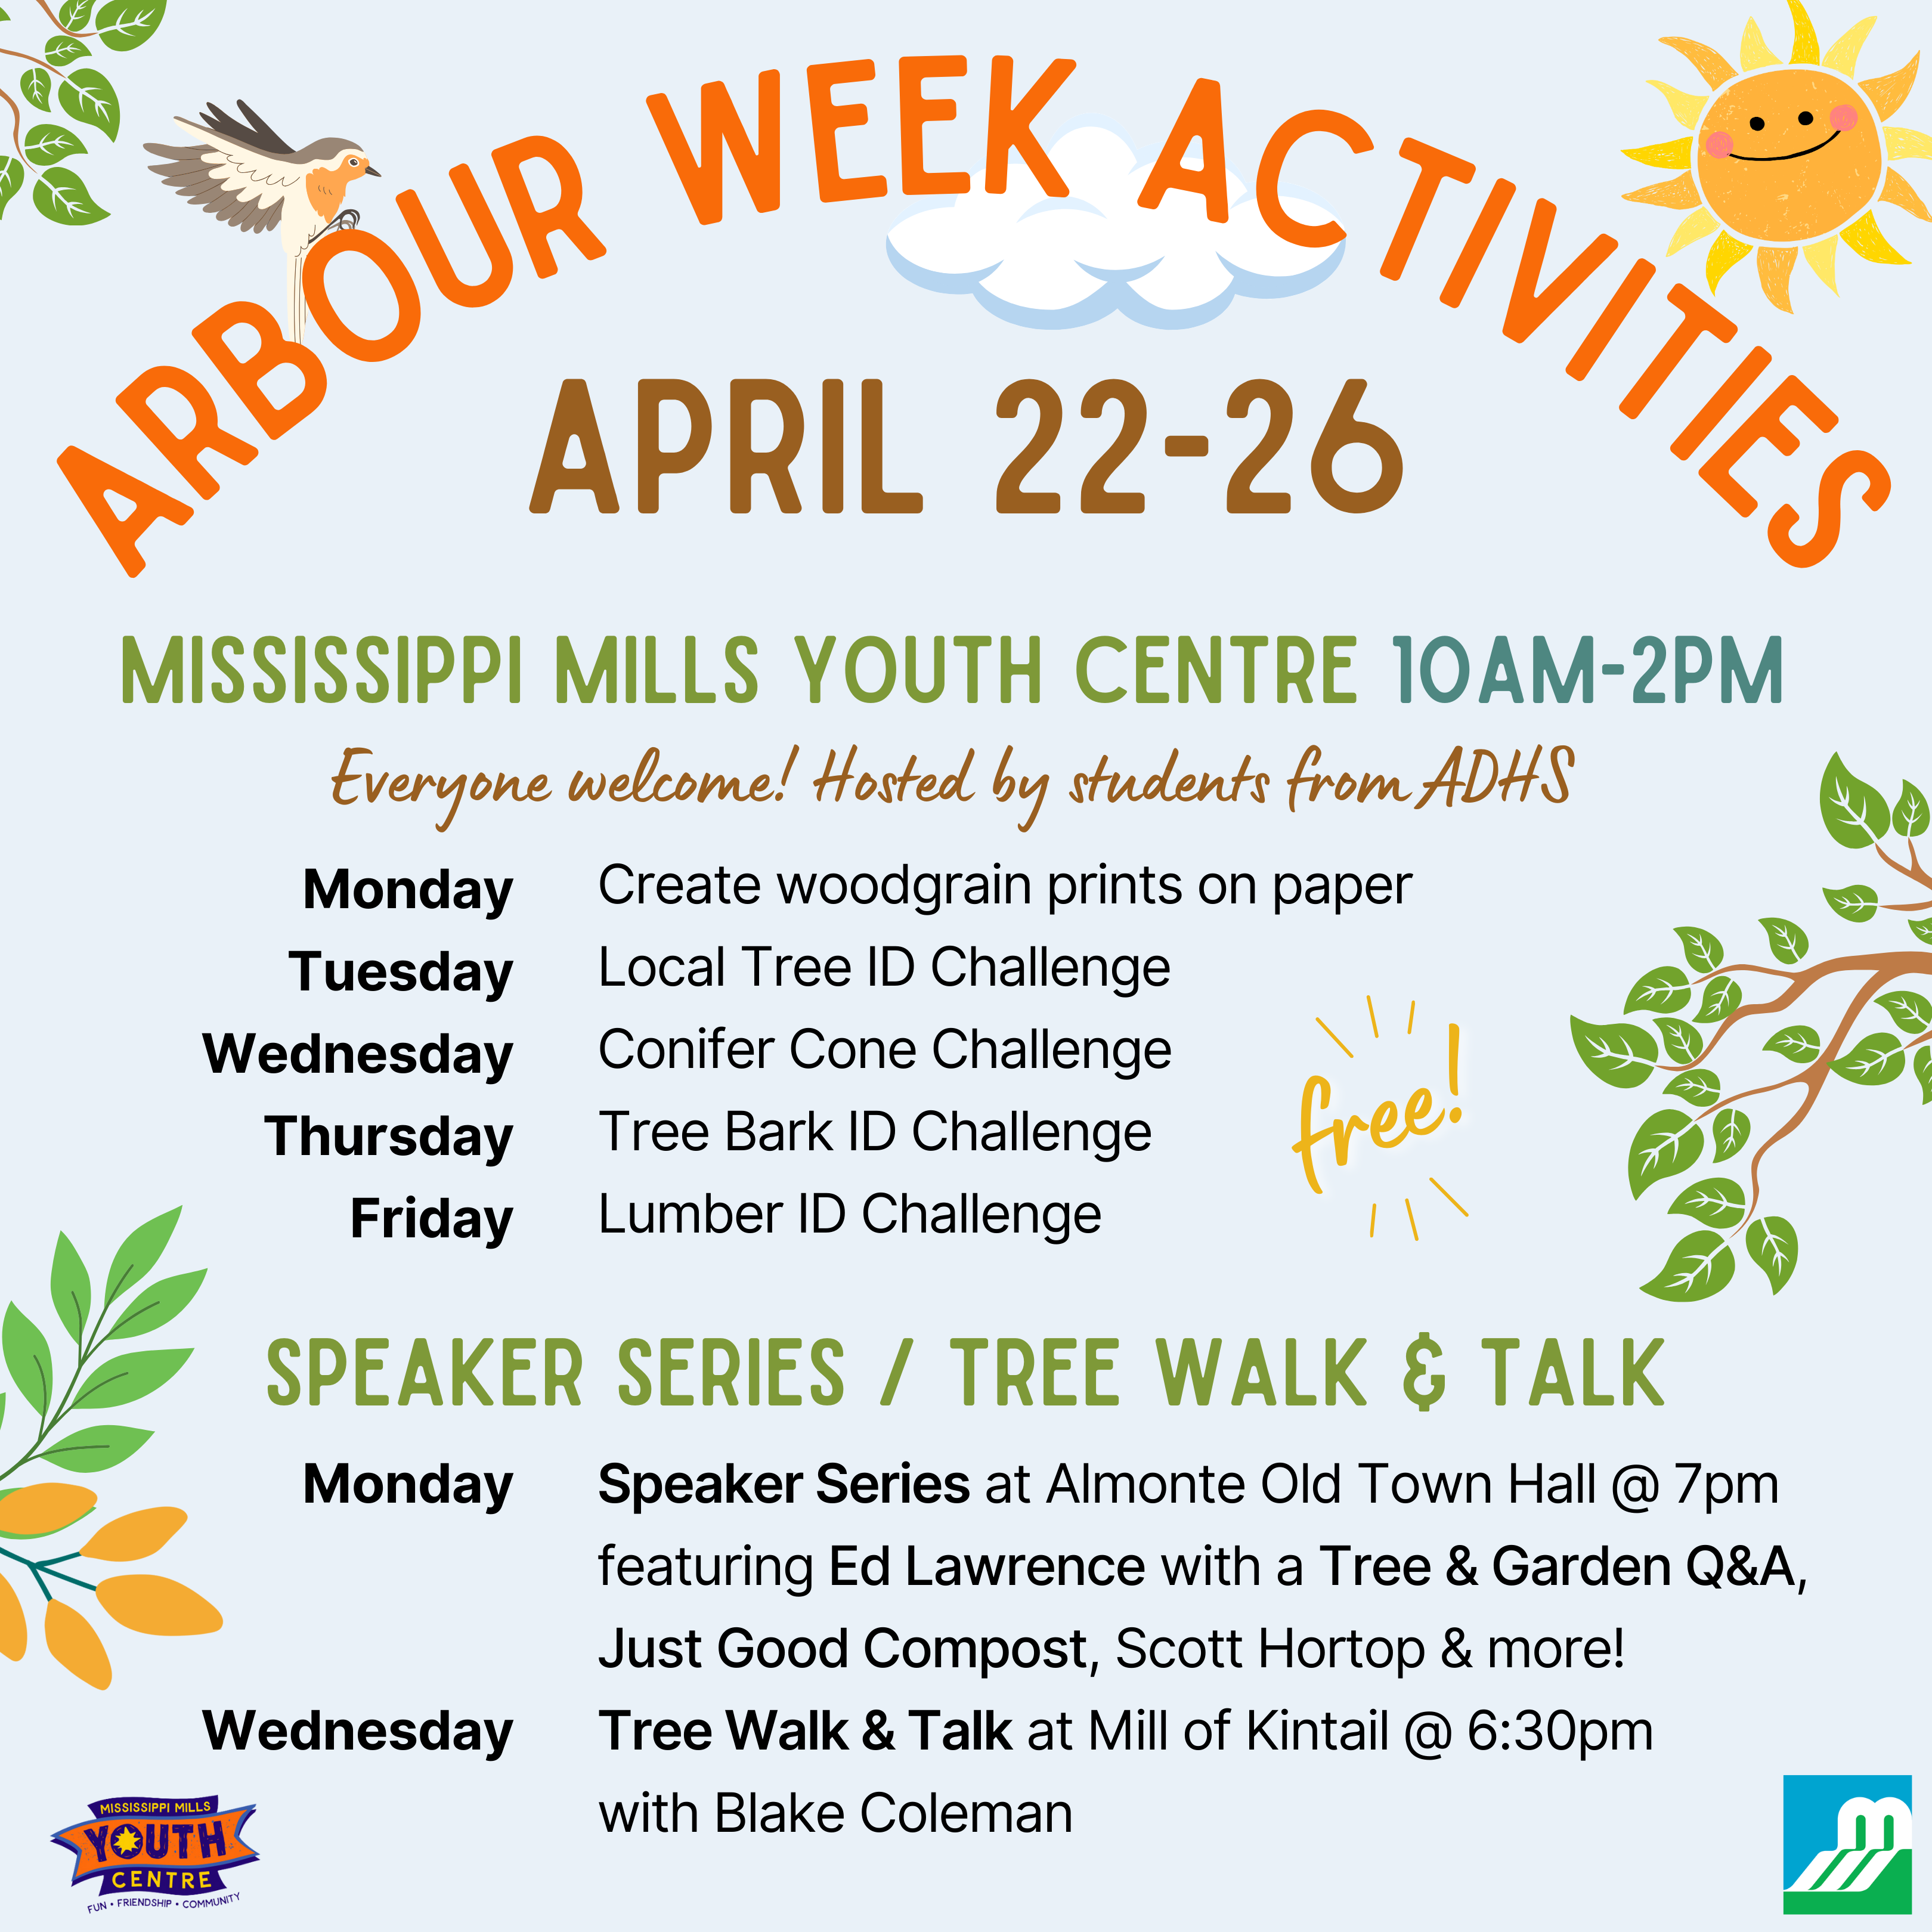 Graphic featuring Arbour Week activities in Mississippi Mills